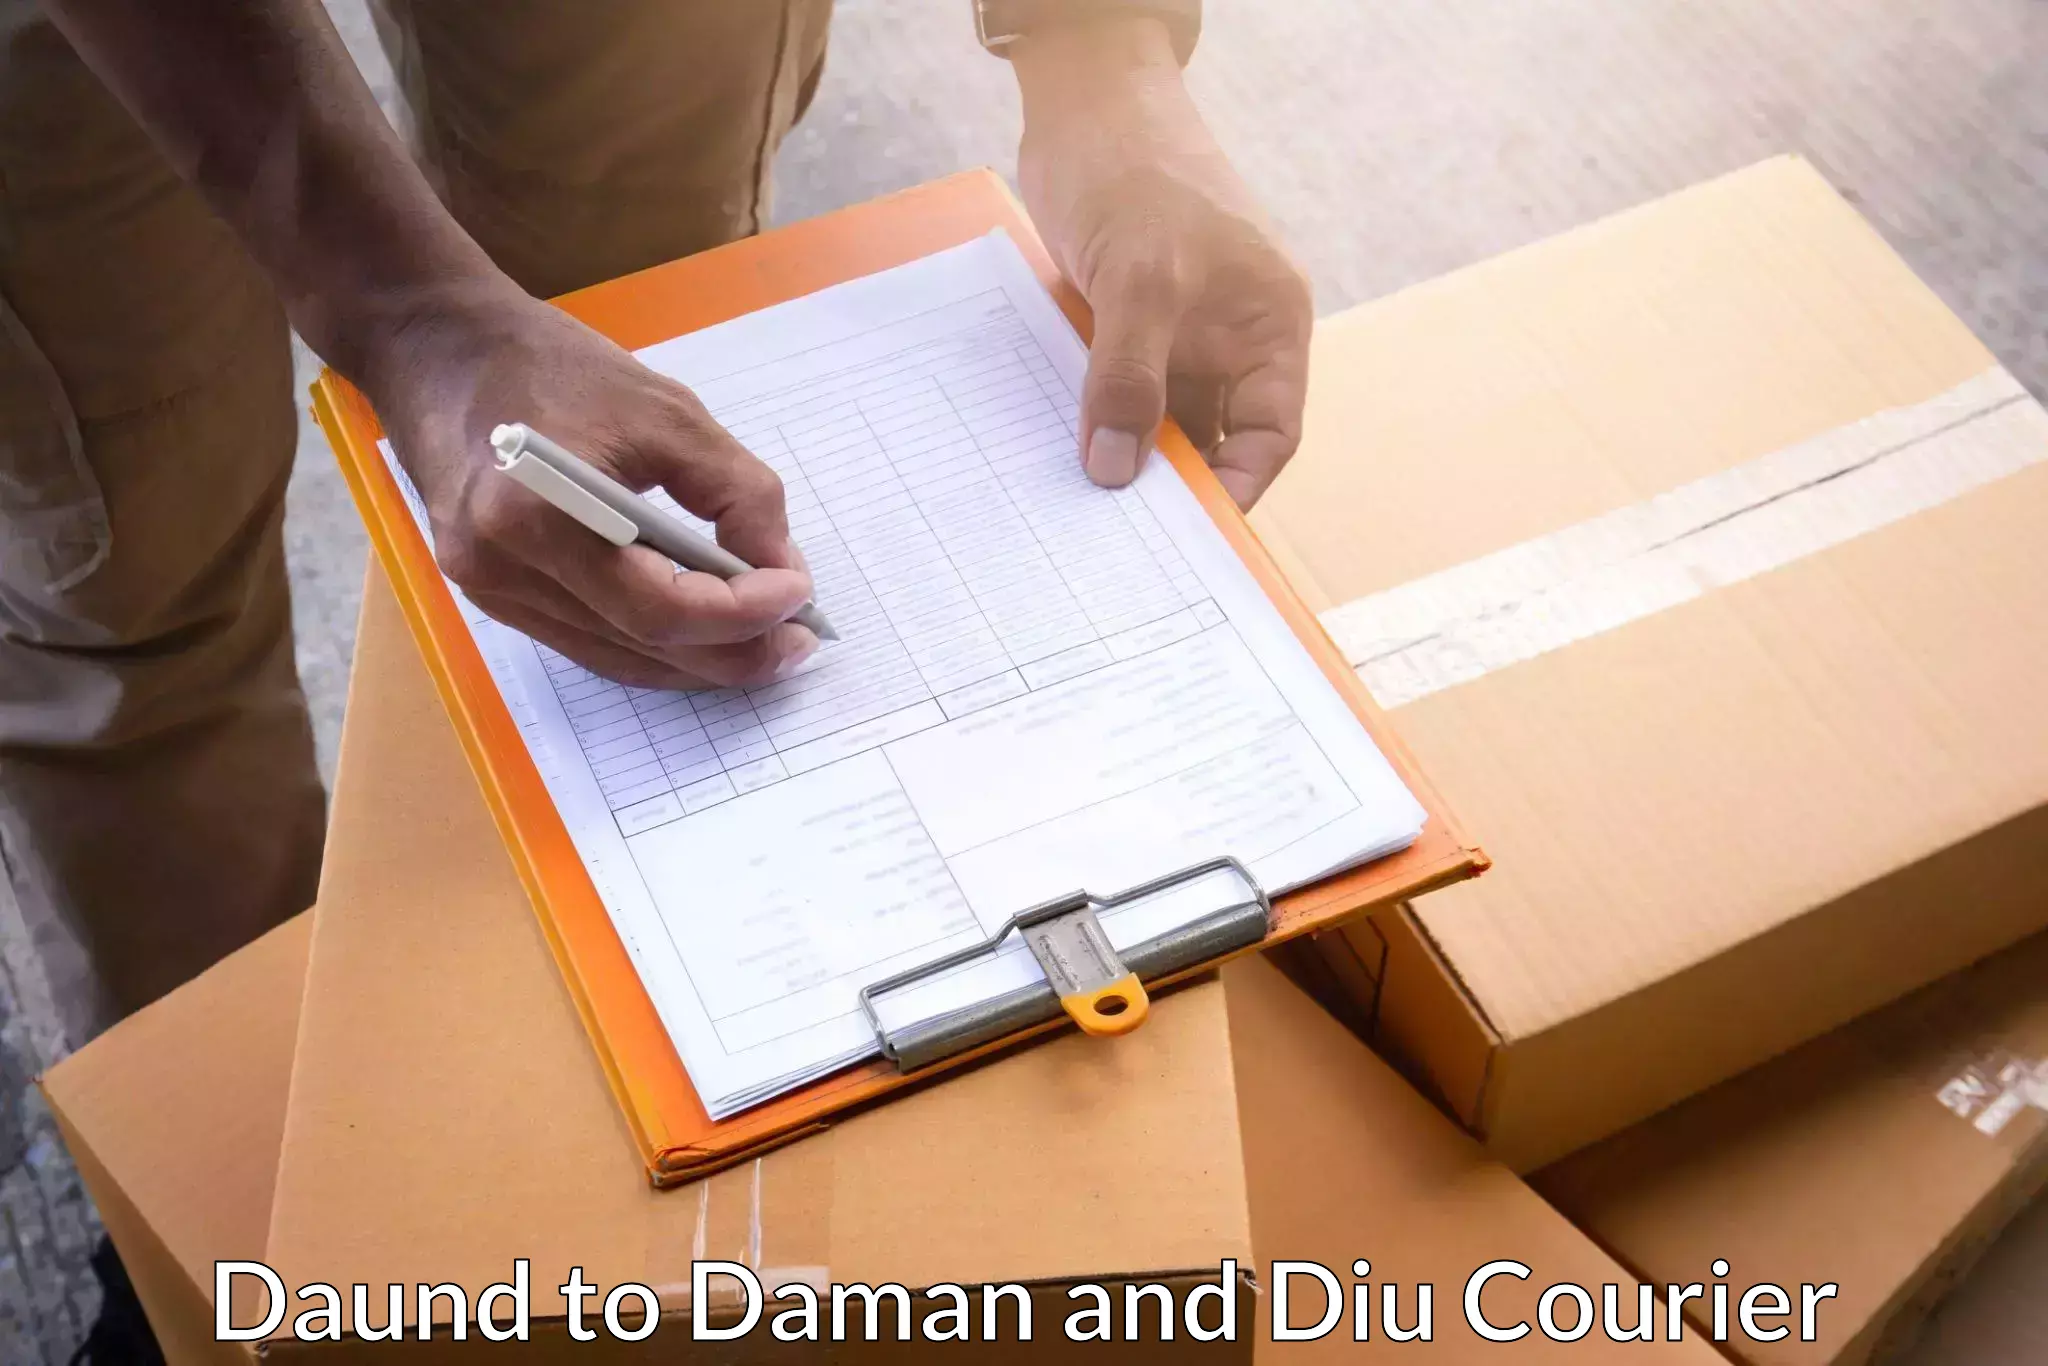 Global courier networks Daund to Daman and Diu